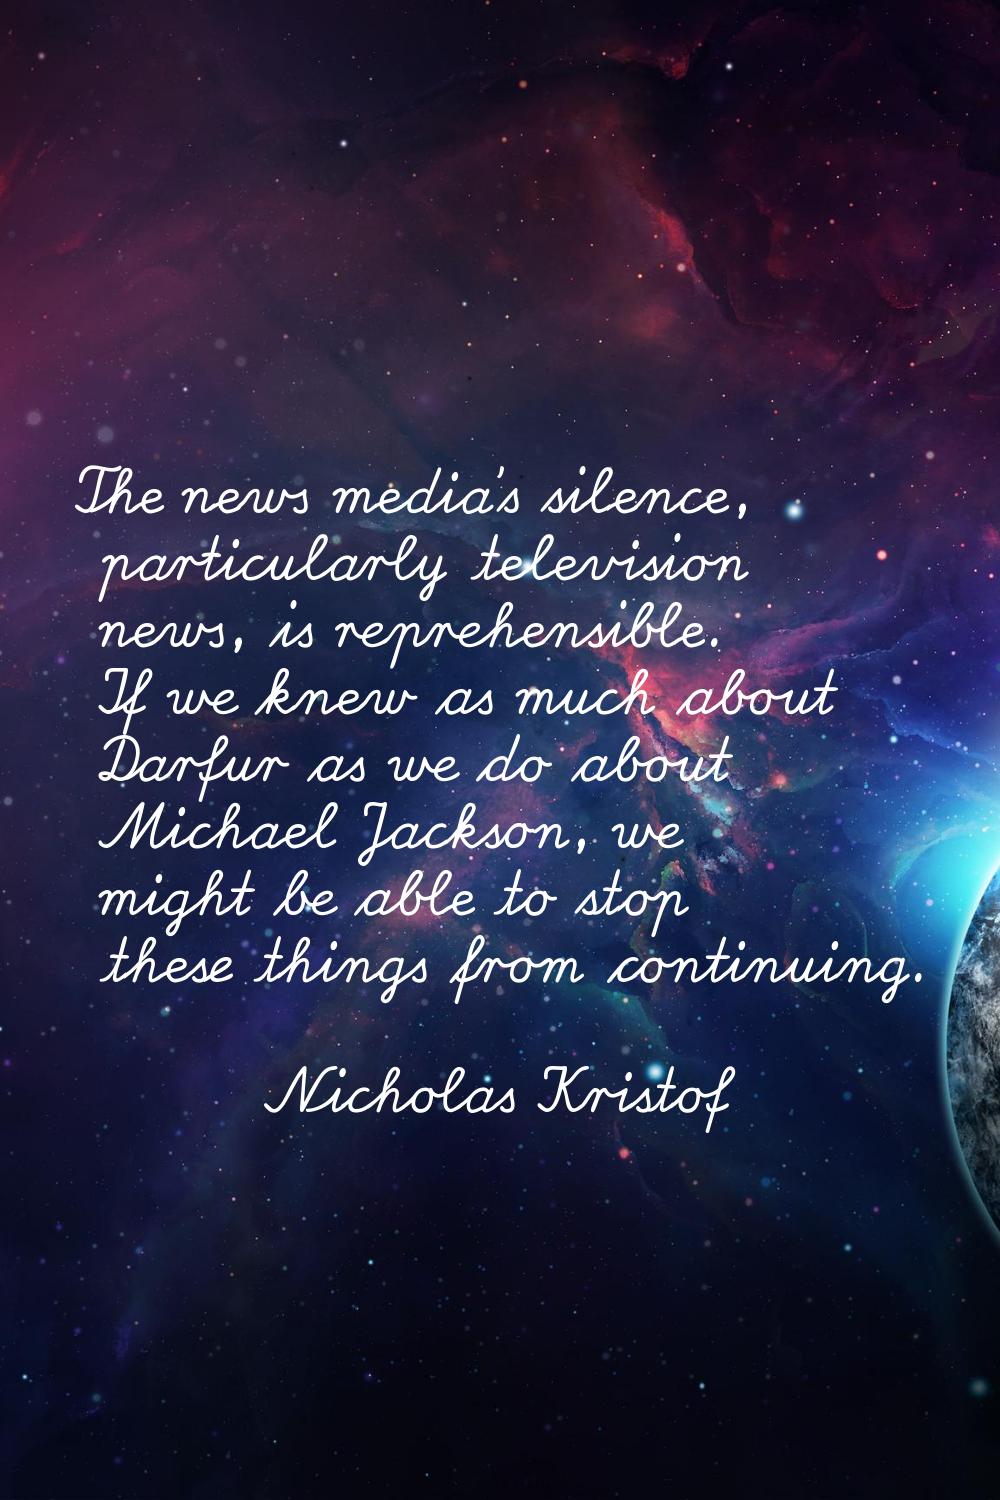 The news media's silence, particularly television news, is reprehensible. If we knew as much about 